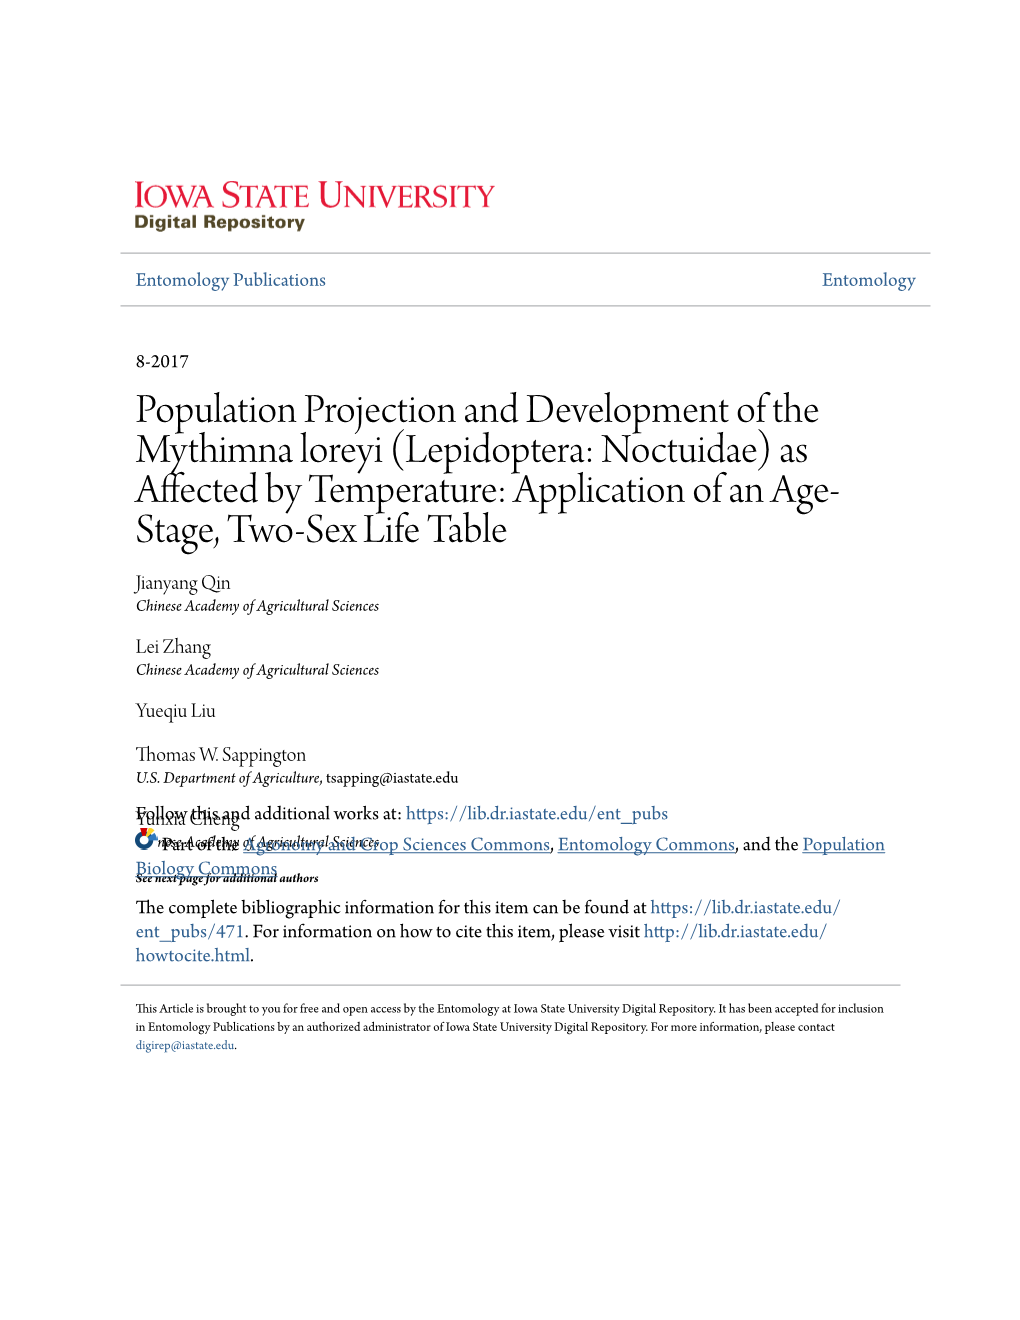 Lepidoptera: Noctuidae) As Affected by Temperature: Application of an Age- Stage, Two-Sex Life Table Jianyang Qin Chinese Academy of Agricultural Sciences